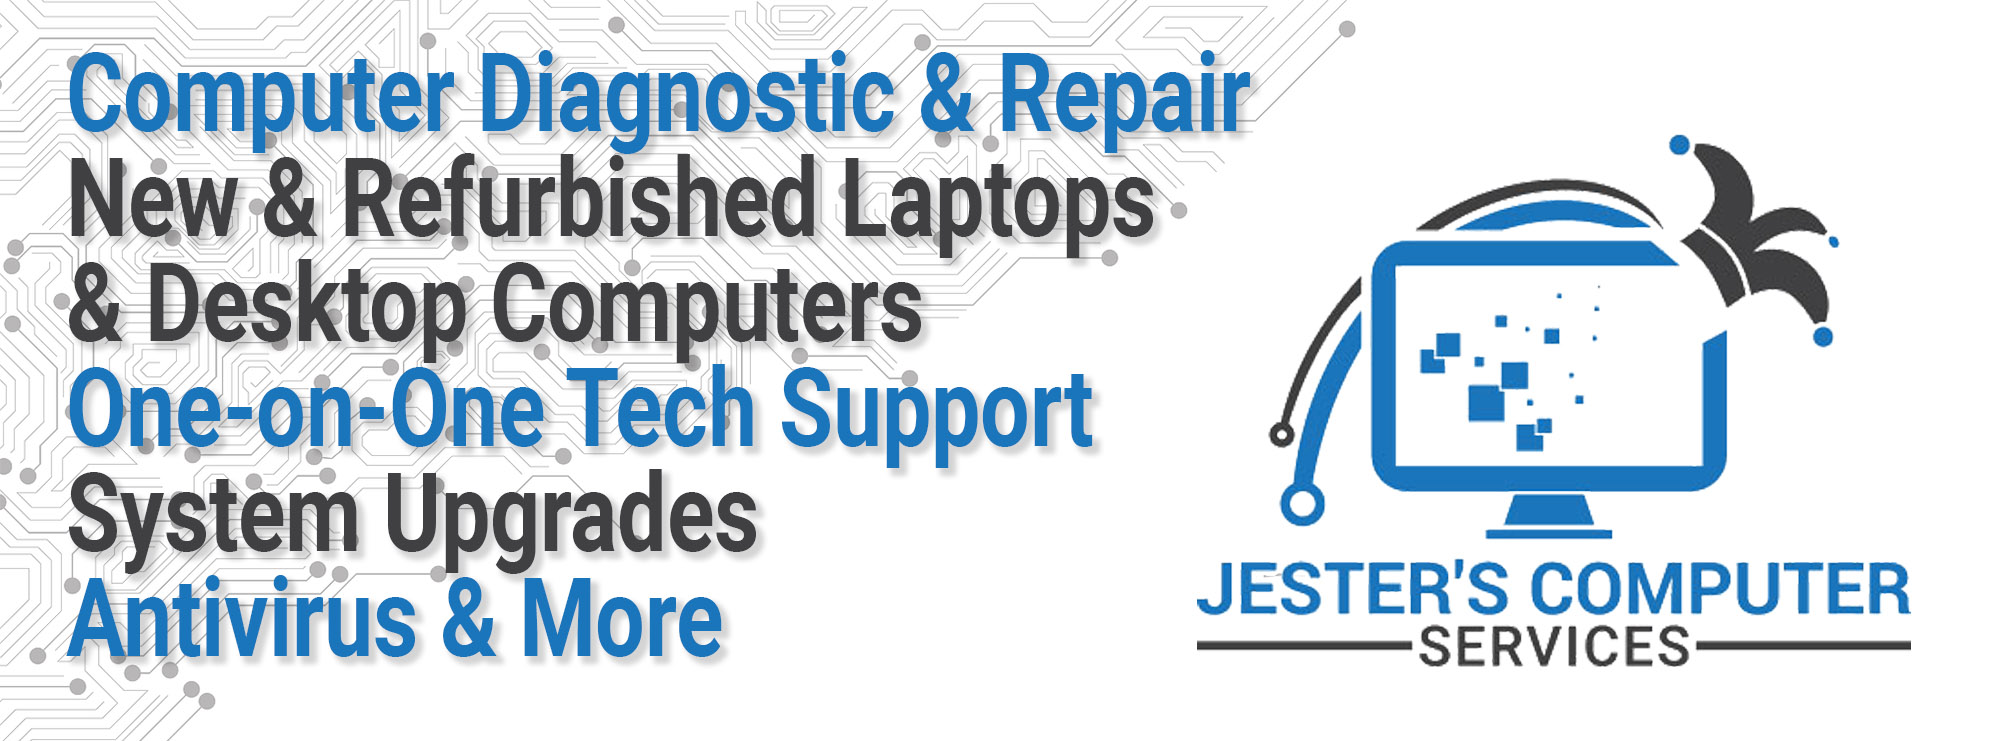 Jester's Computer Services